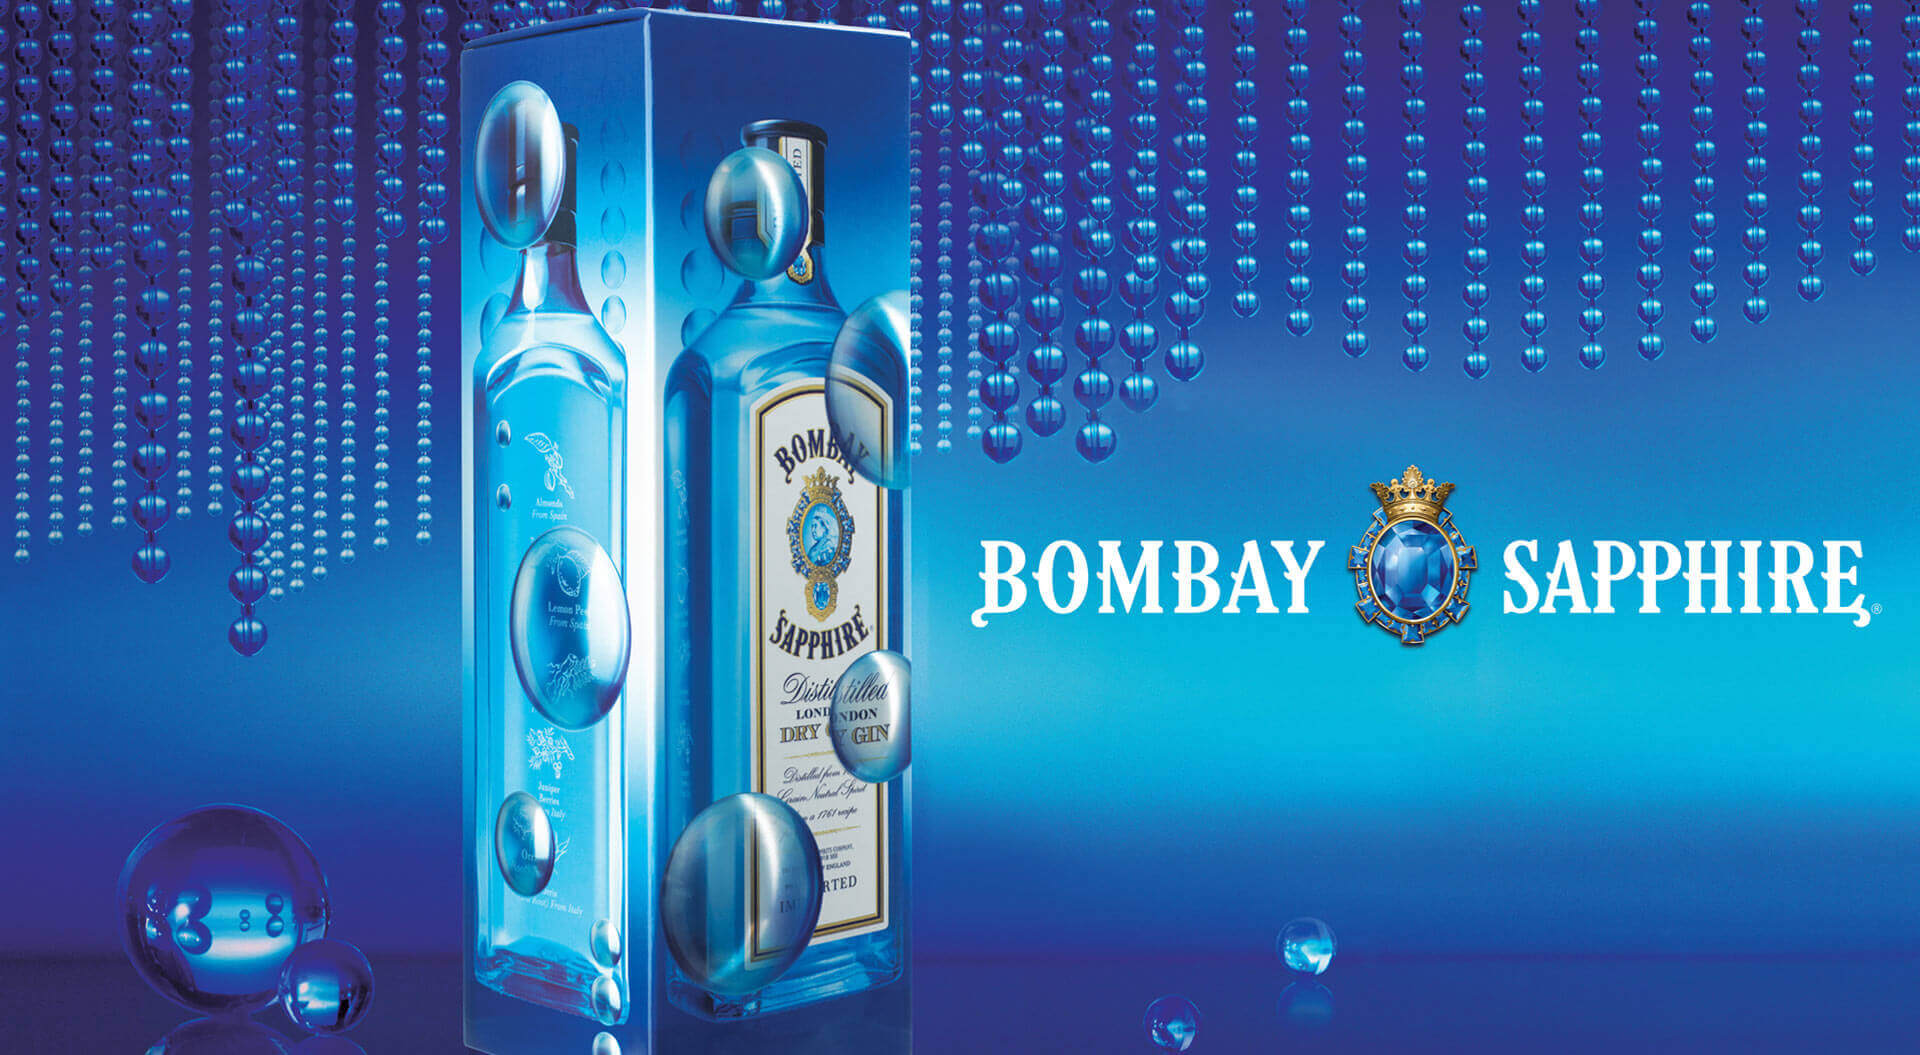 Spirits industry promotion campaigns travel retail, strategy marketing, retail design, airports, duty-free alcohol marketing, innovative concepts ideas Bacardi Global Travel Retail, brand  Bombay Sapphire Reign